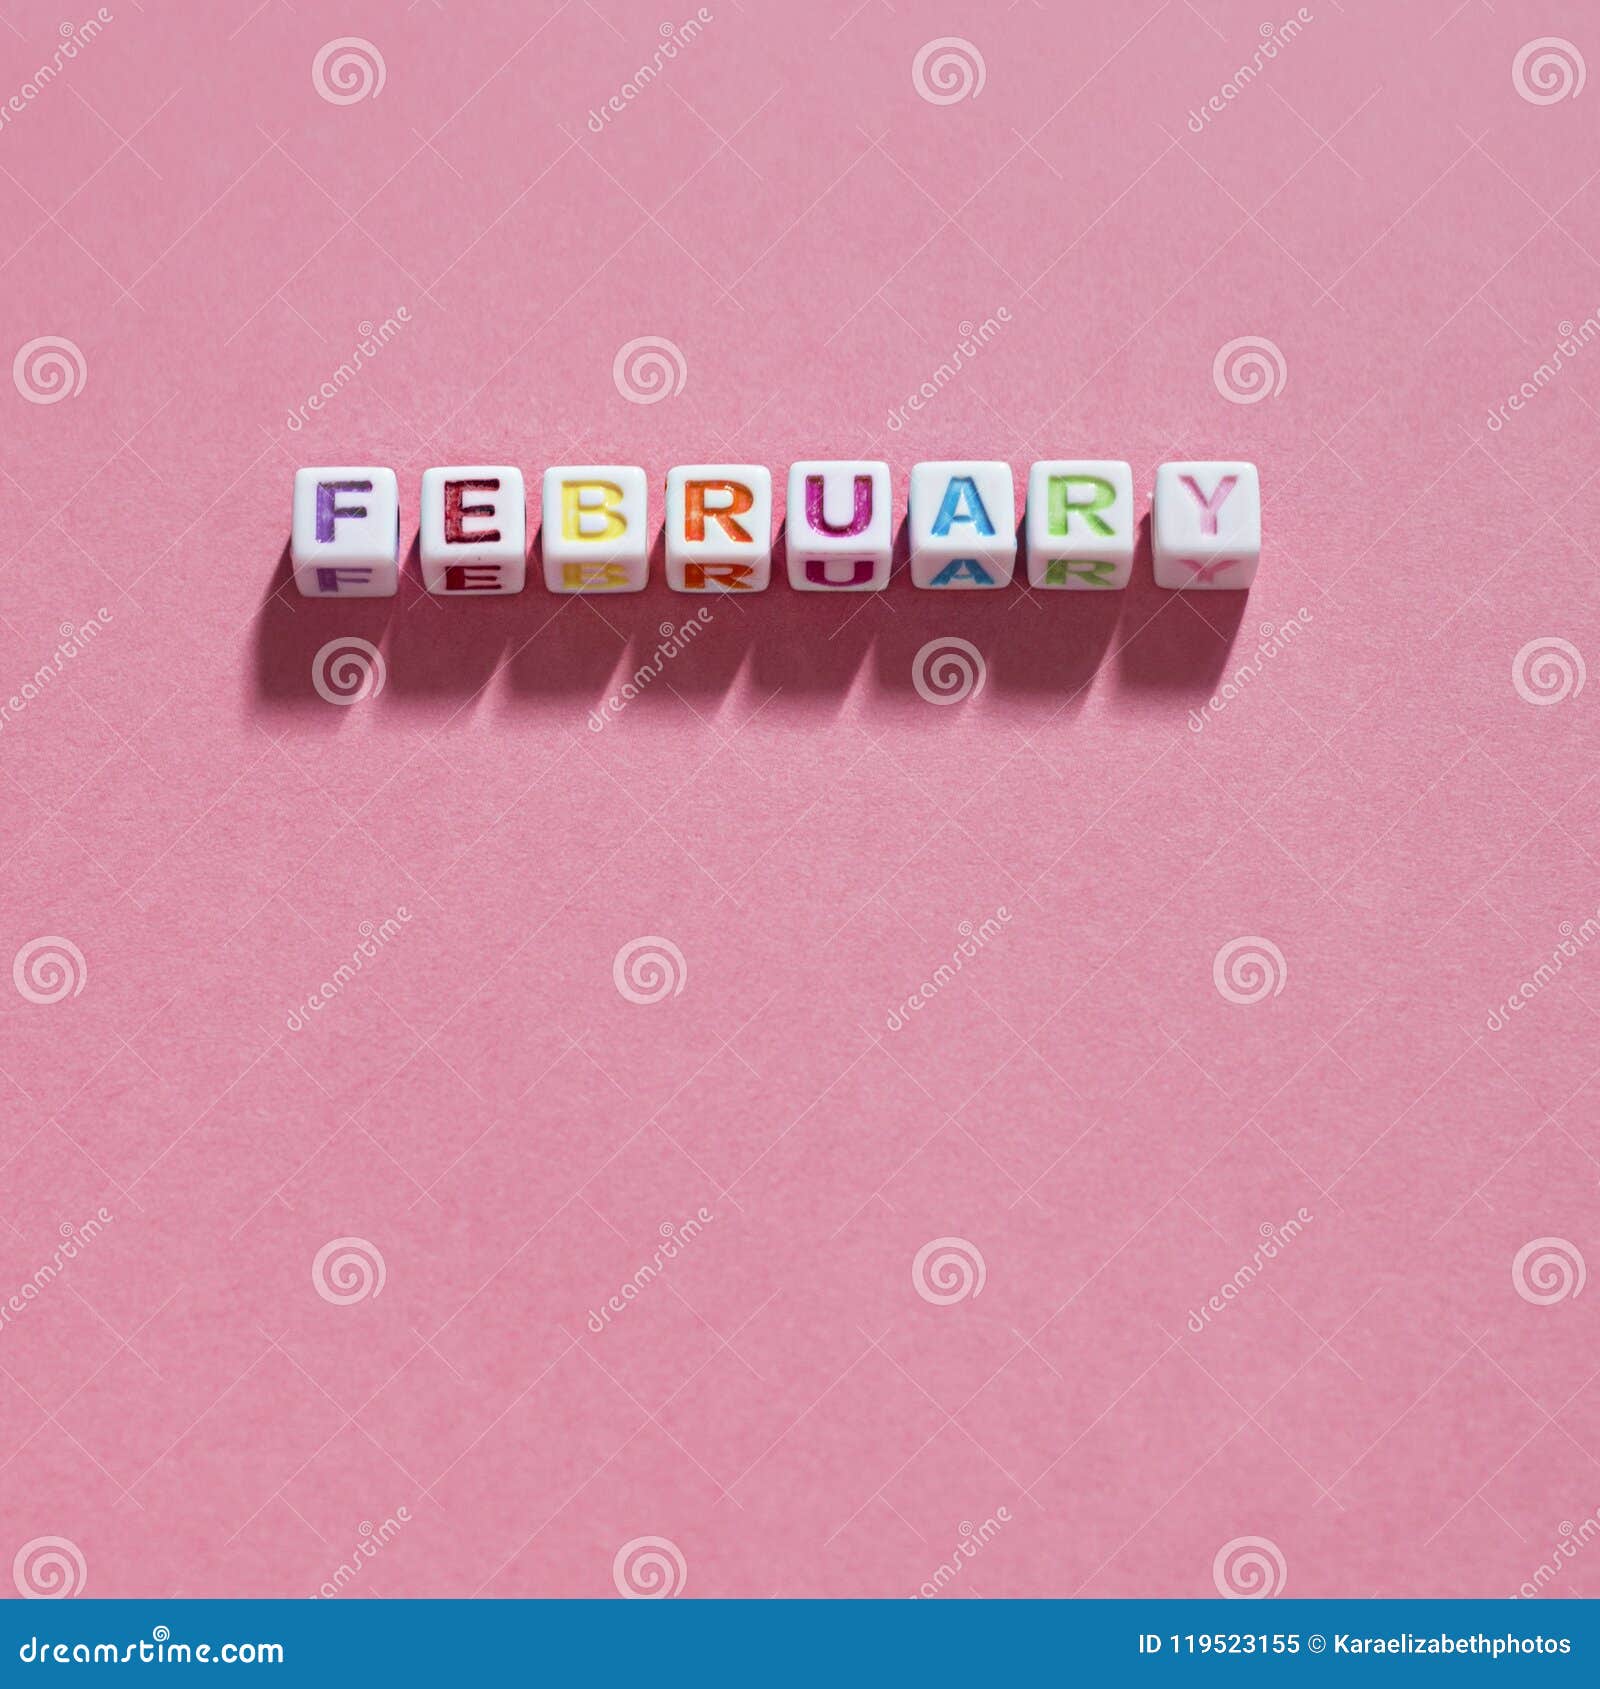 Multicolored February On A Pink Background Stock Image Image Of Date